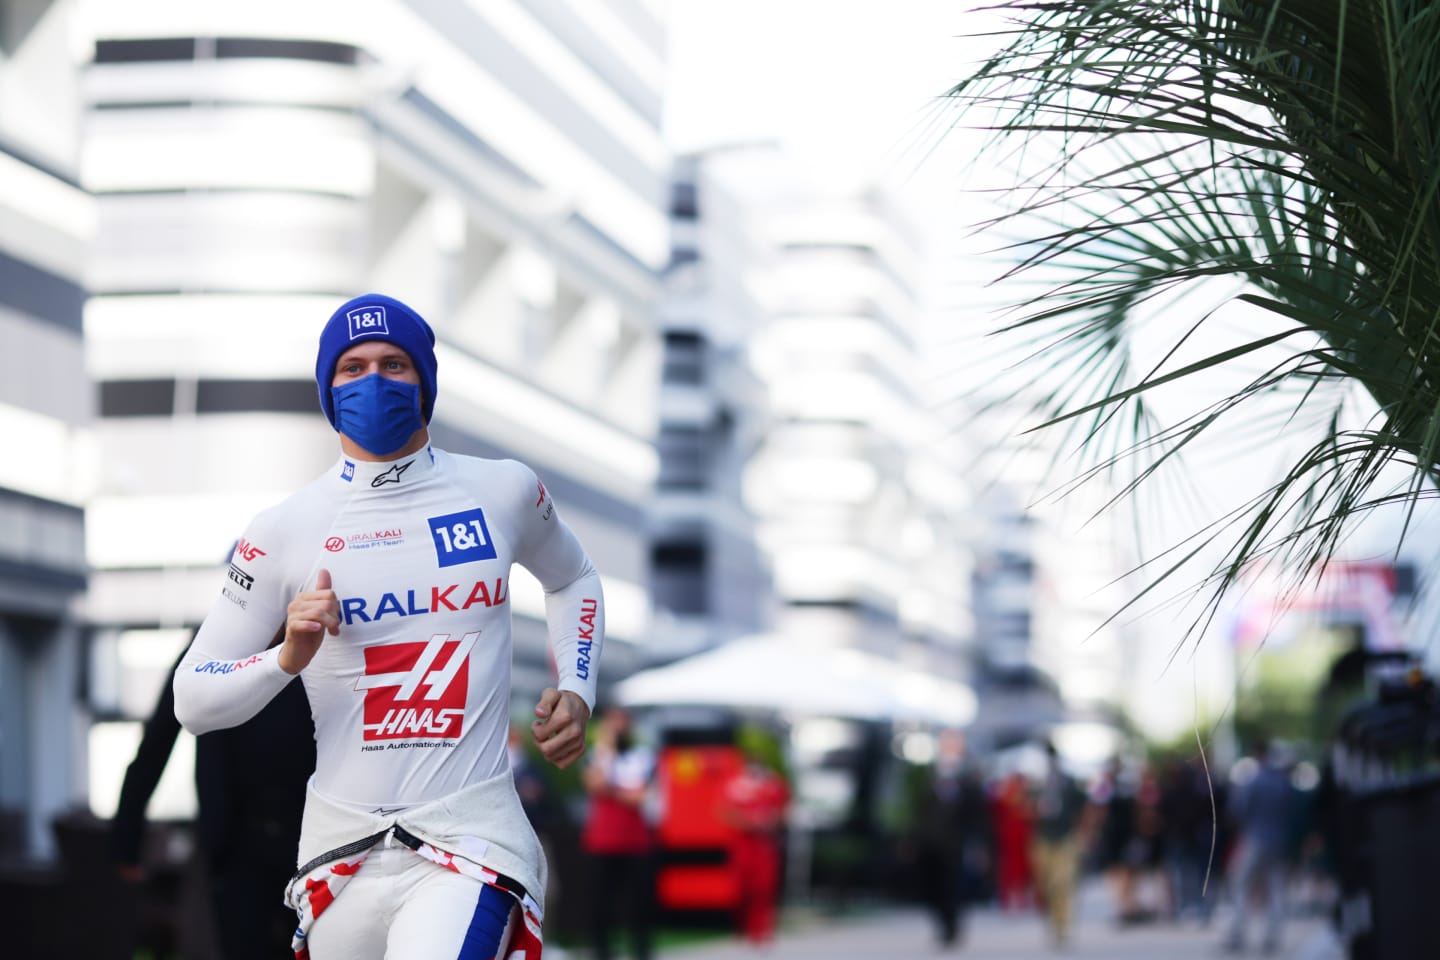 SOCHI, RUSSIA - SEPTEMBER 24: Mick Schumacher of Germany and Haas F1 runs in the Paddock before practice ahead of the F1 Grand Prix of Russia at Sochi Autodrom on September 24, 2021 in Sochi, Russia. (Photo by Peter Fox/Getty Images)